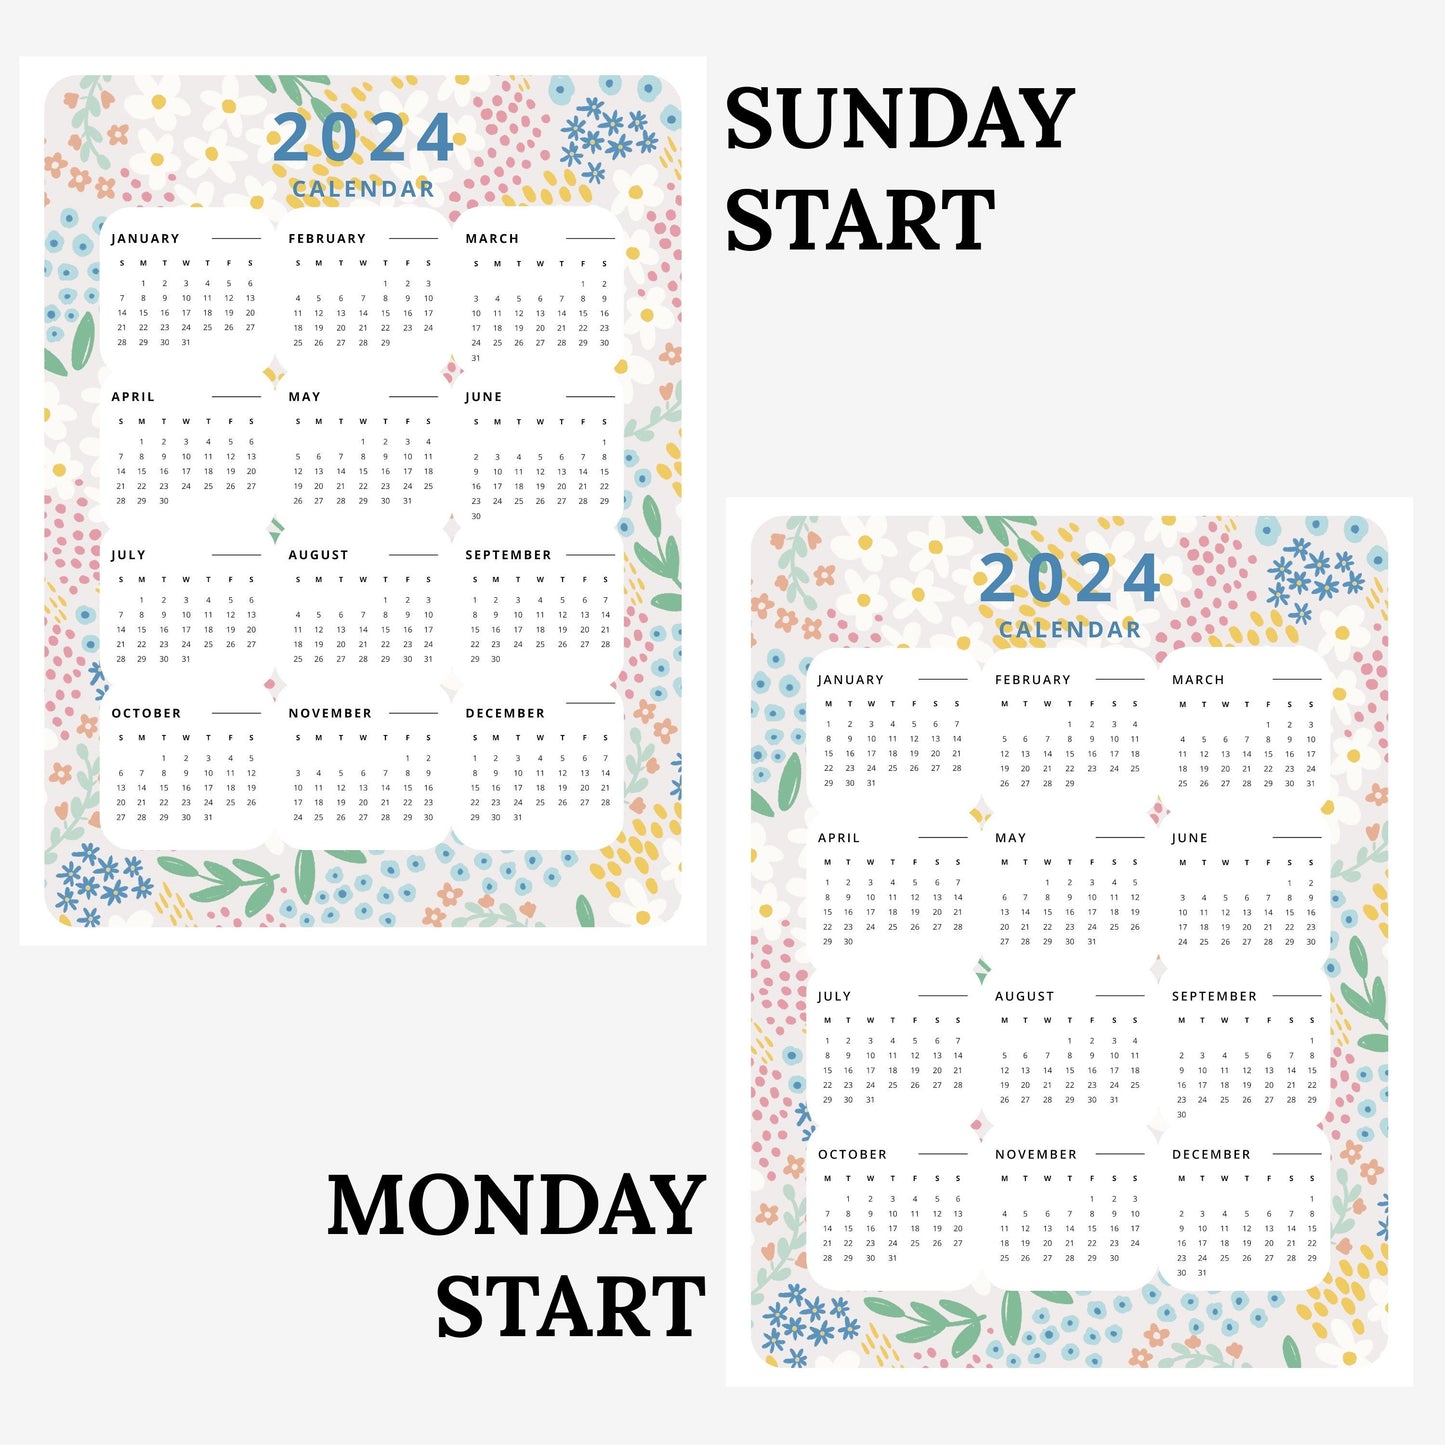 3 PK 2024 At A Glance Calendars | Gift for Coworkers Neighbors Friends | Full Year All Months | Sunday or Monday Start Day of the Week